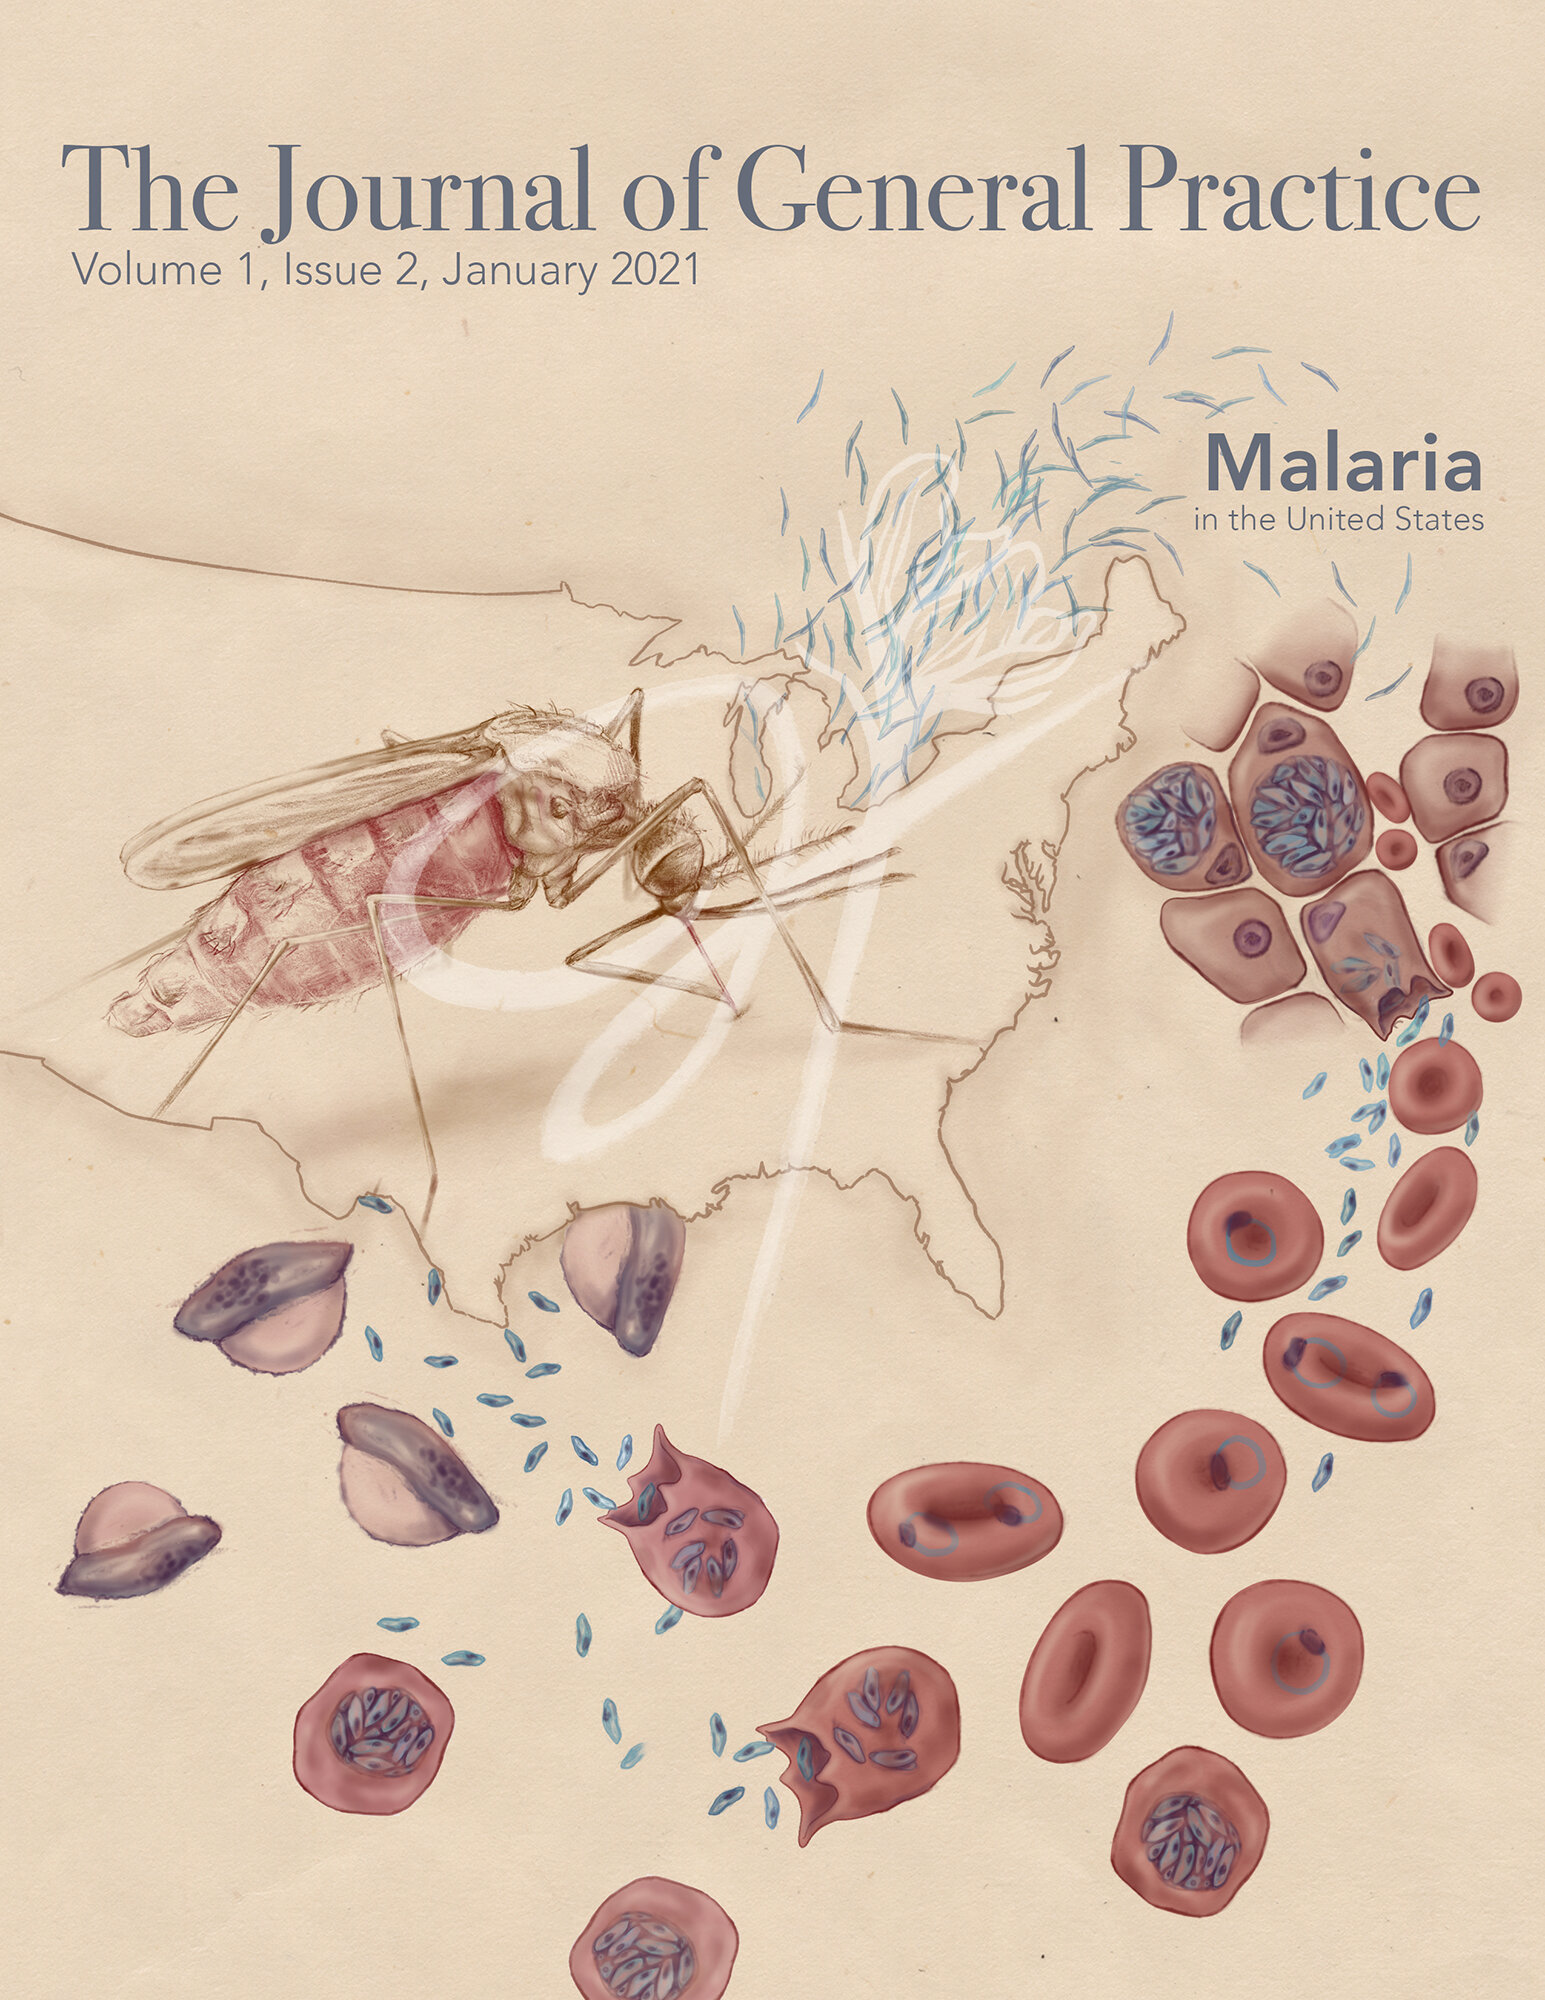   Medium:  Graphite, Photoshop   Objective:  To conceptually illustrate for editorial use the presence of the Anopheles mosquito and malaria in the United States. 